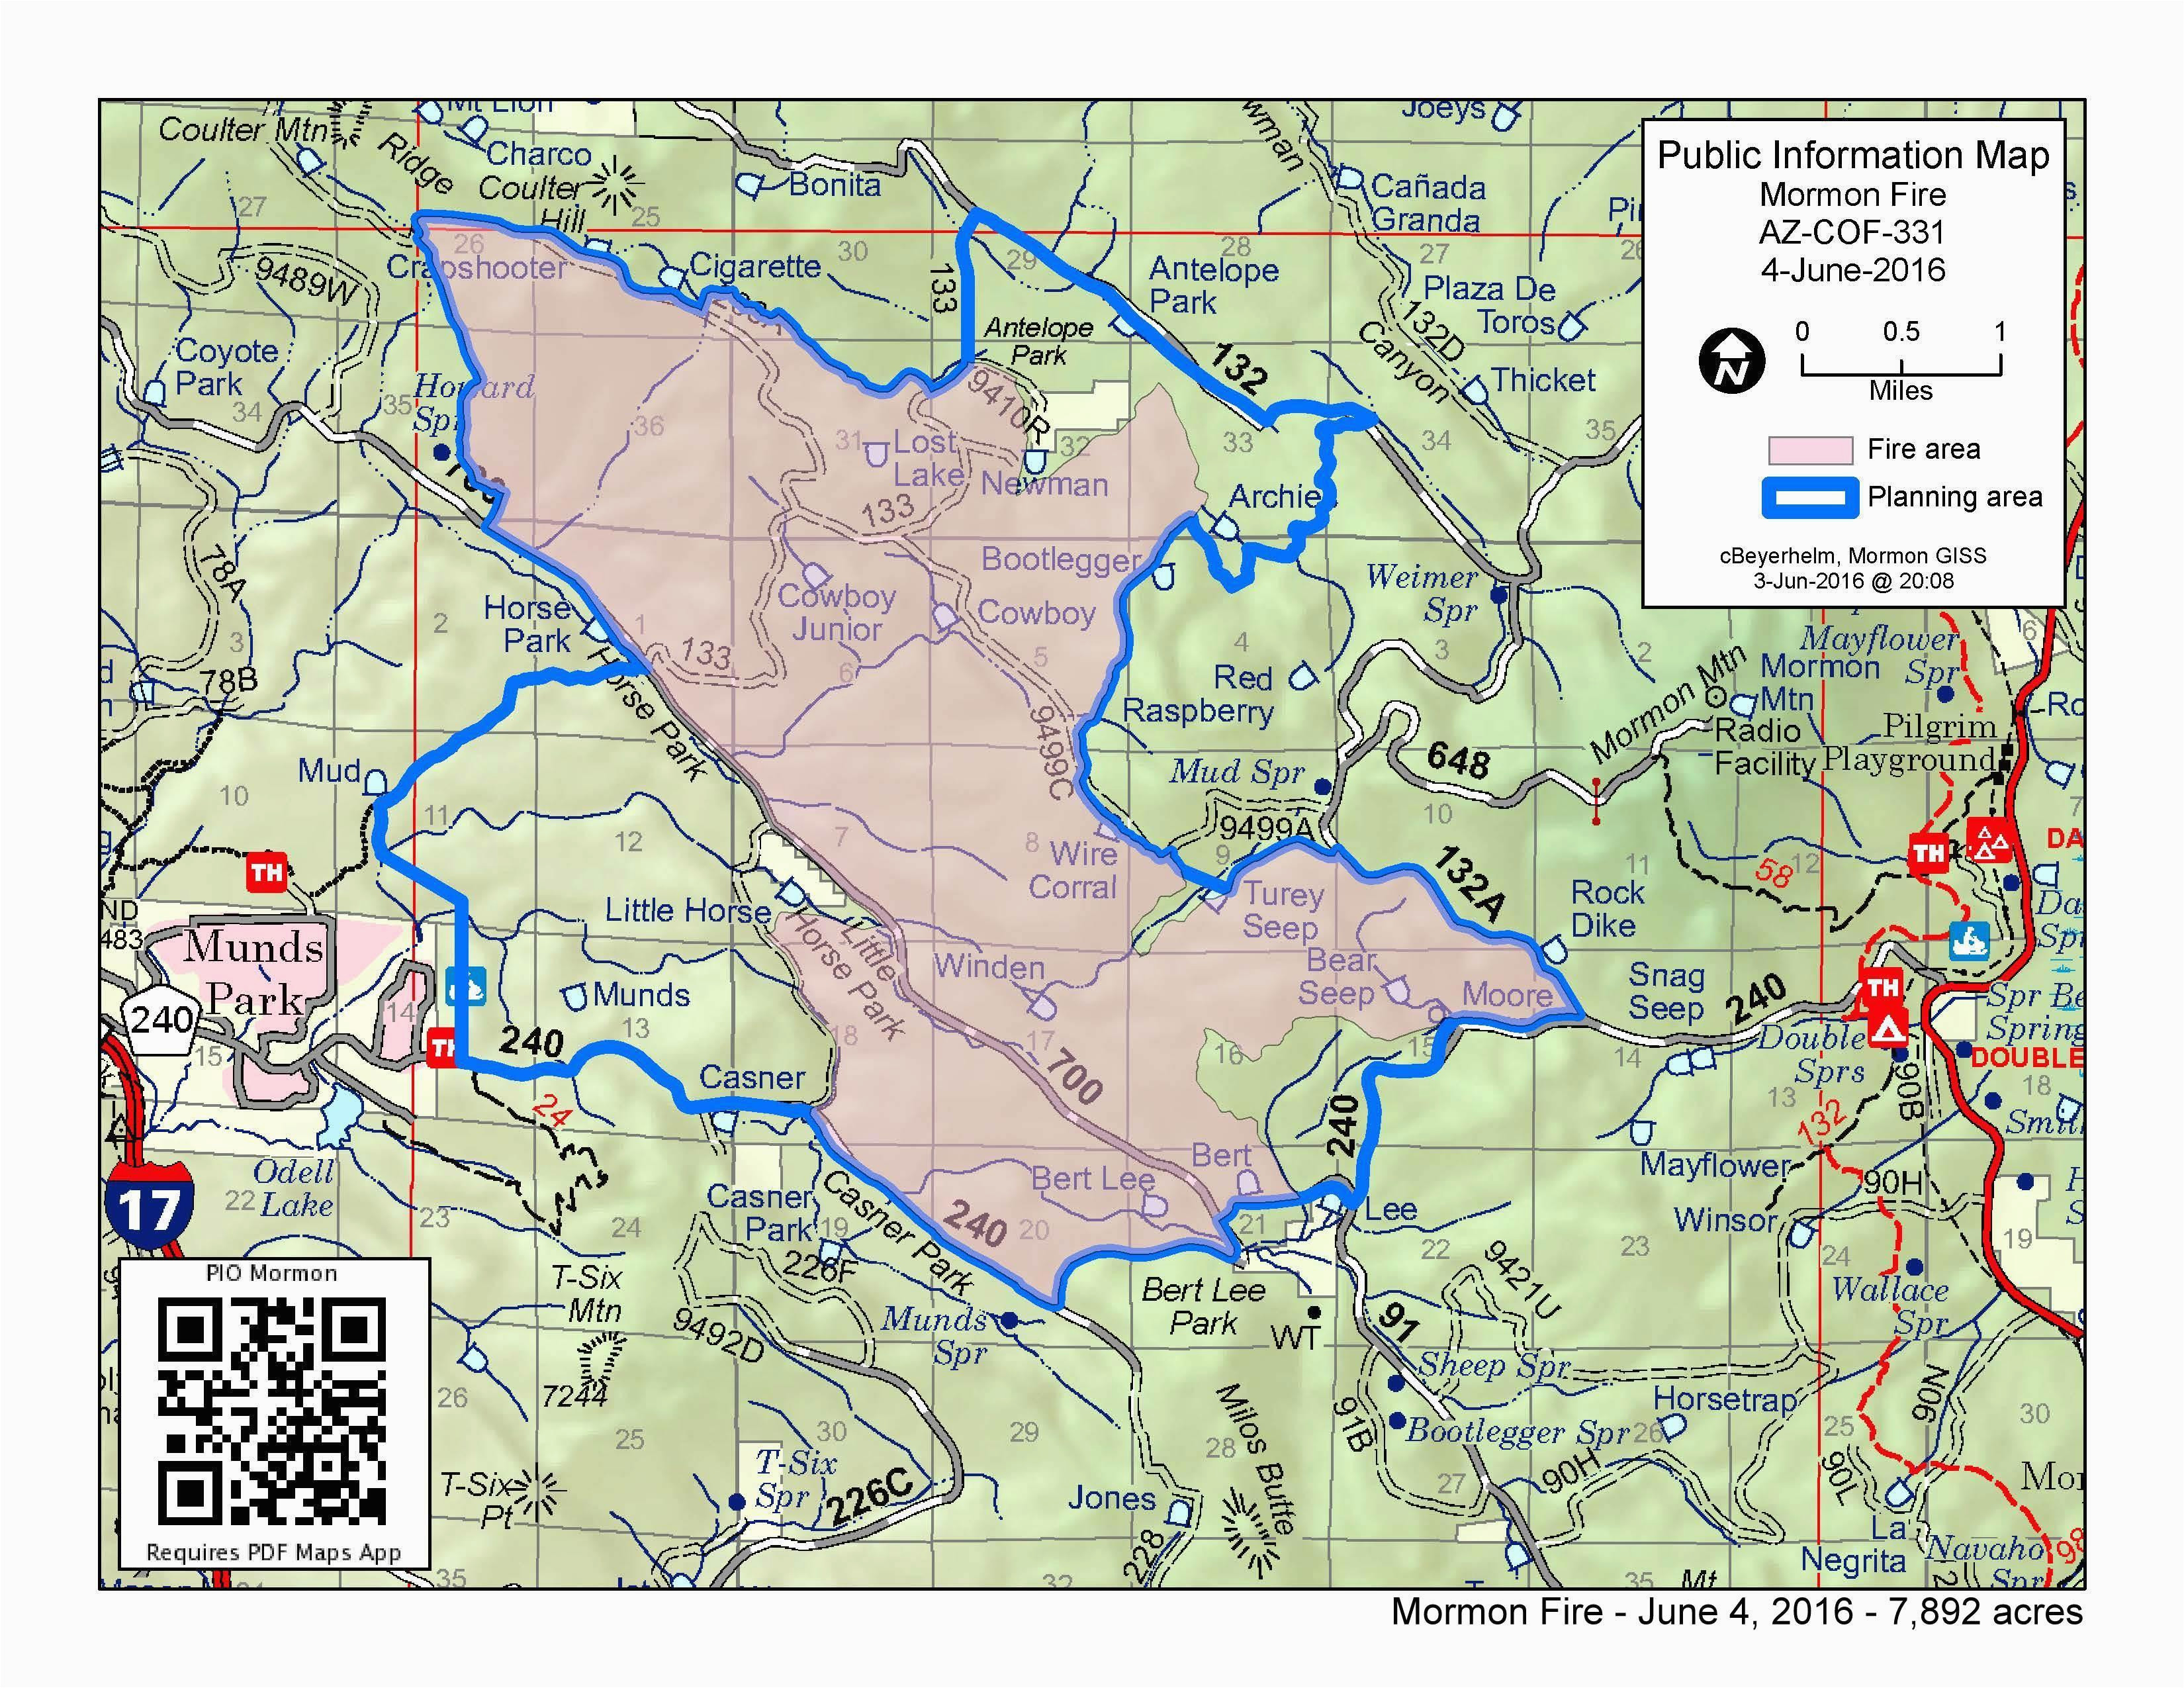 Current Colorado Wildfires Map Current Colorado Fires Map Luxury The Age Western Wildfires Climate Of Current Colorado Wildfires Map 